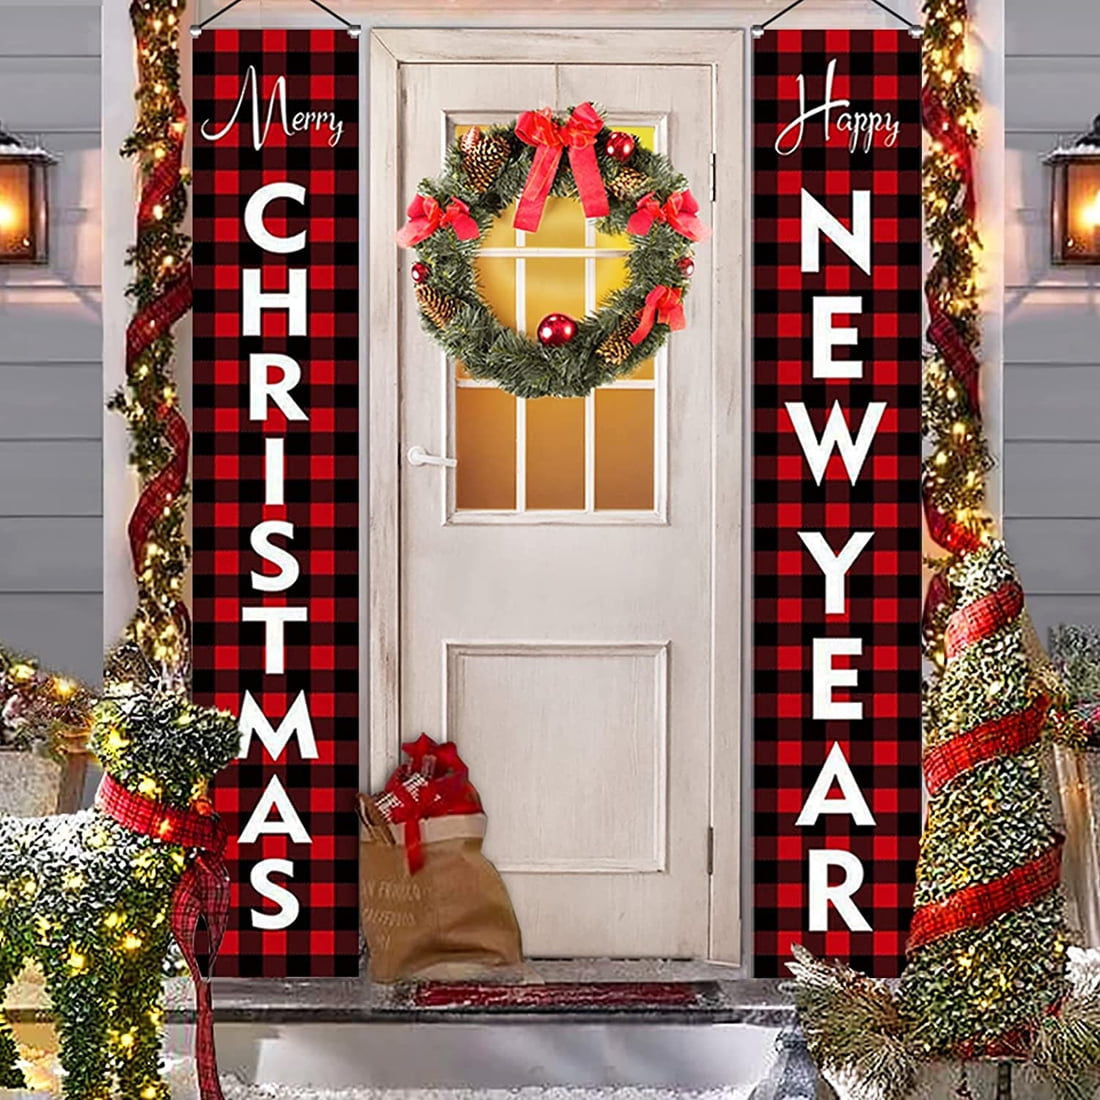 Christmas Decorations Banner Christmas Porch Sign for Red Black Buffalo Banners,Indoor Outdoor Christmas Decorations Porch,Christmas Sign for Front Porch,Christmas Decorations Christmas Gifts 